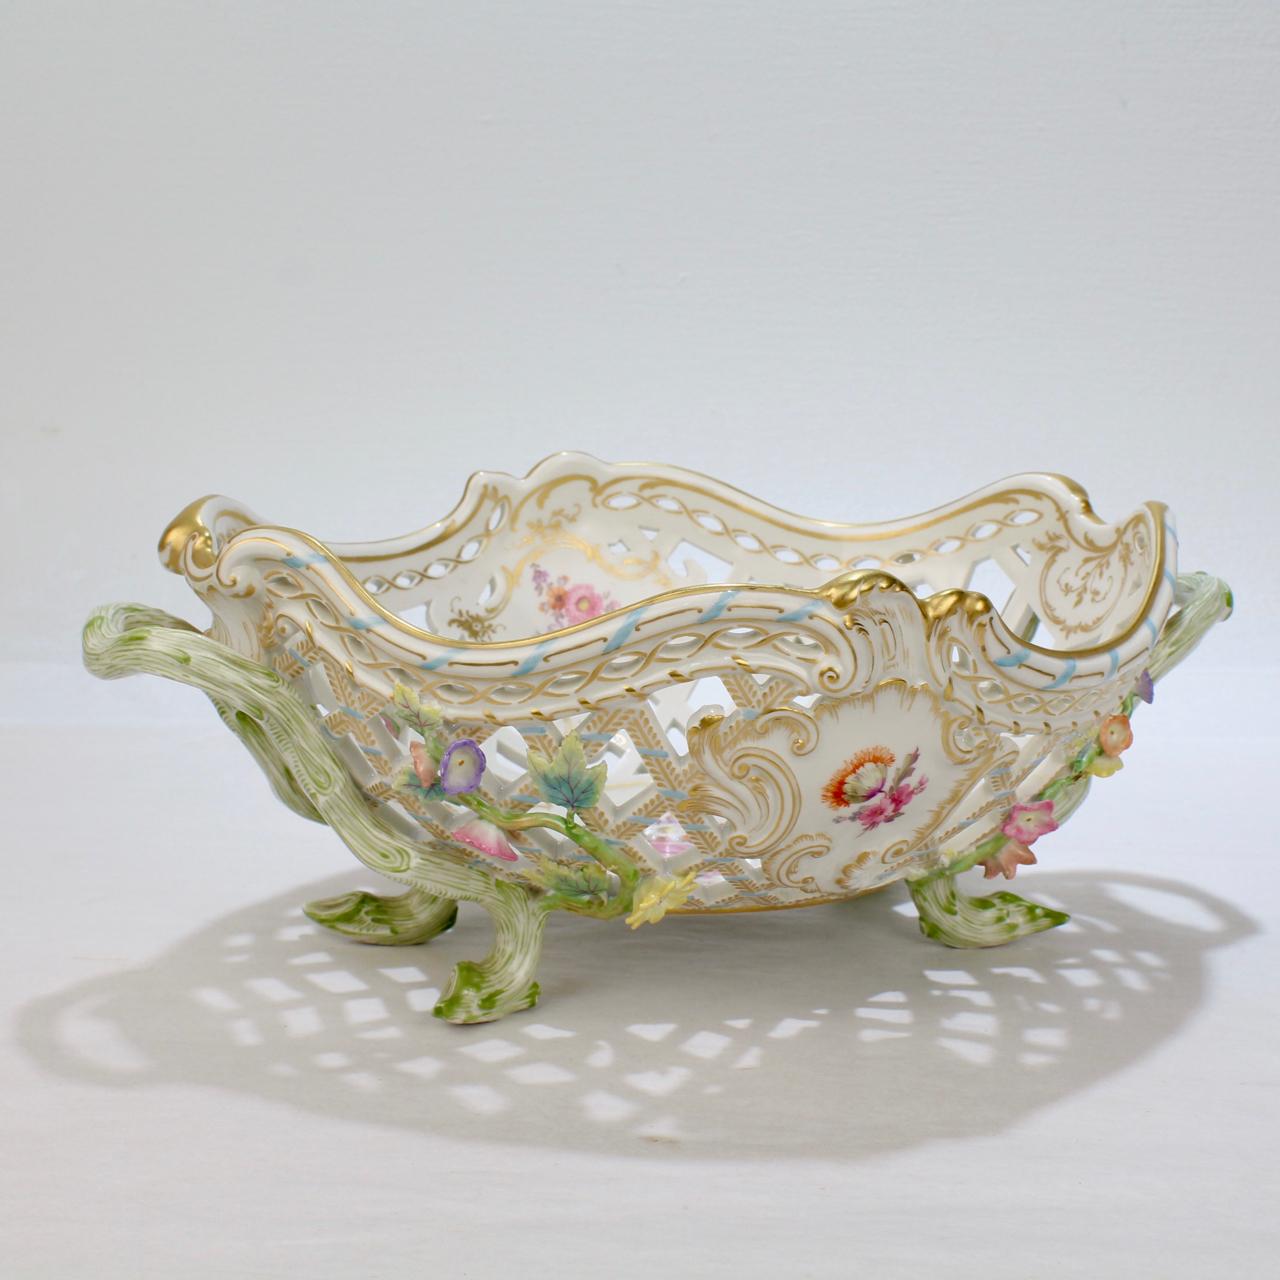 A very fine, antique KPM porcelain flower encrusted fruit basket.

With traditional twig form handles and feet, an openwork body, flower encrustation, and hand painted floral decoration throughout. 

Marked to the base with a blue underglaze